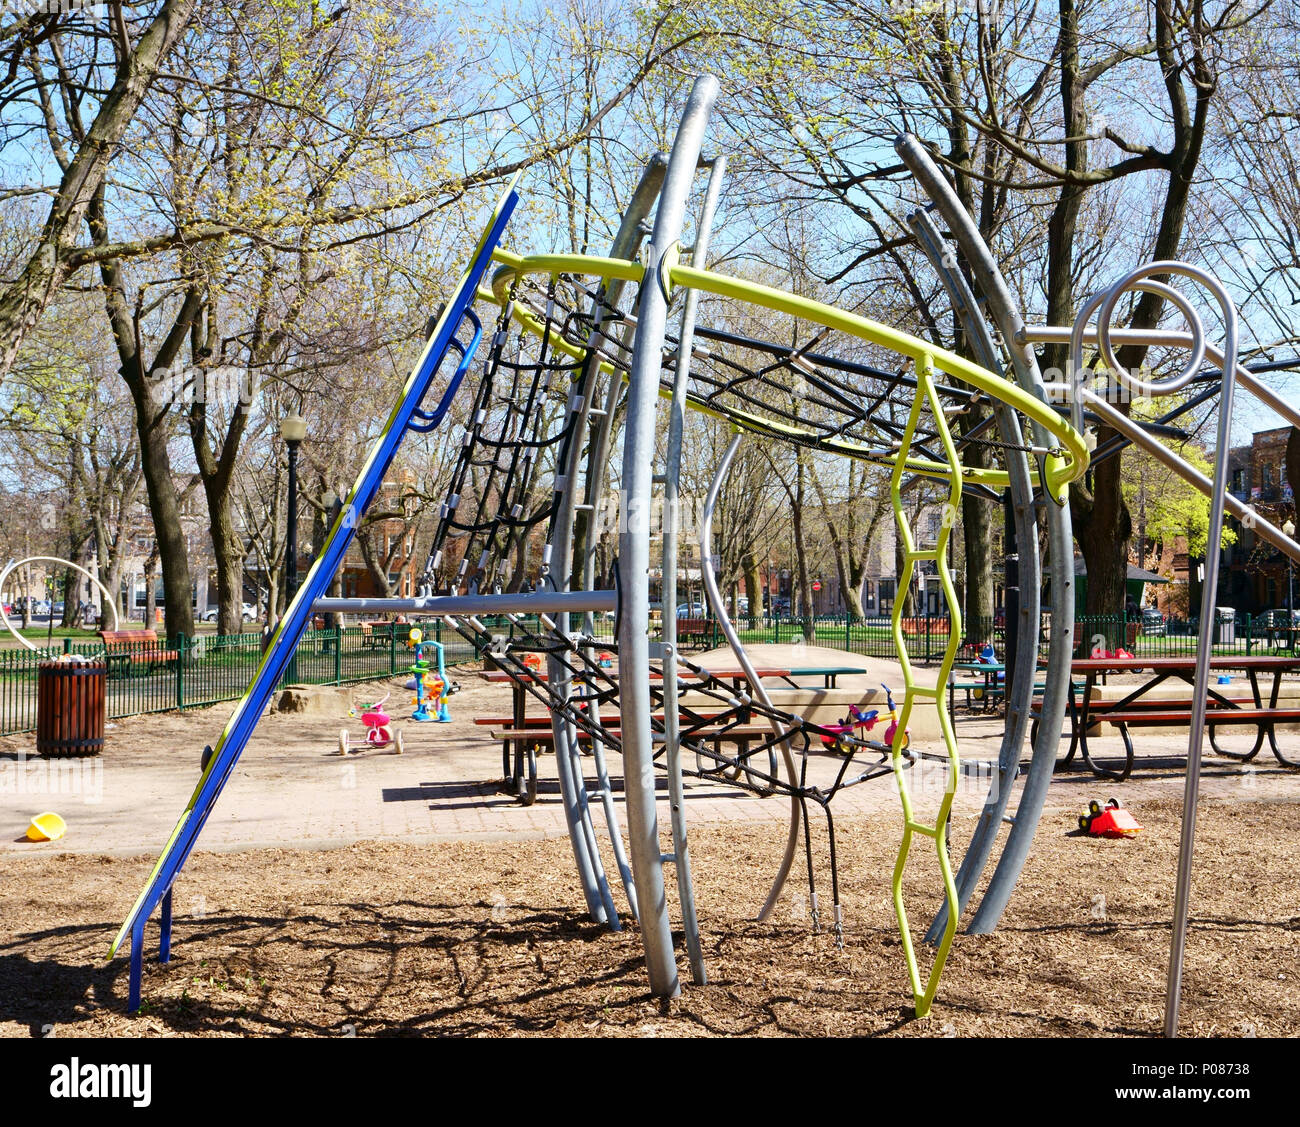 Playground in public park with a lot of colorful public toys abandonned by children. Stock Photo